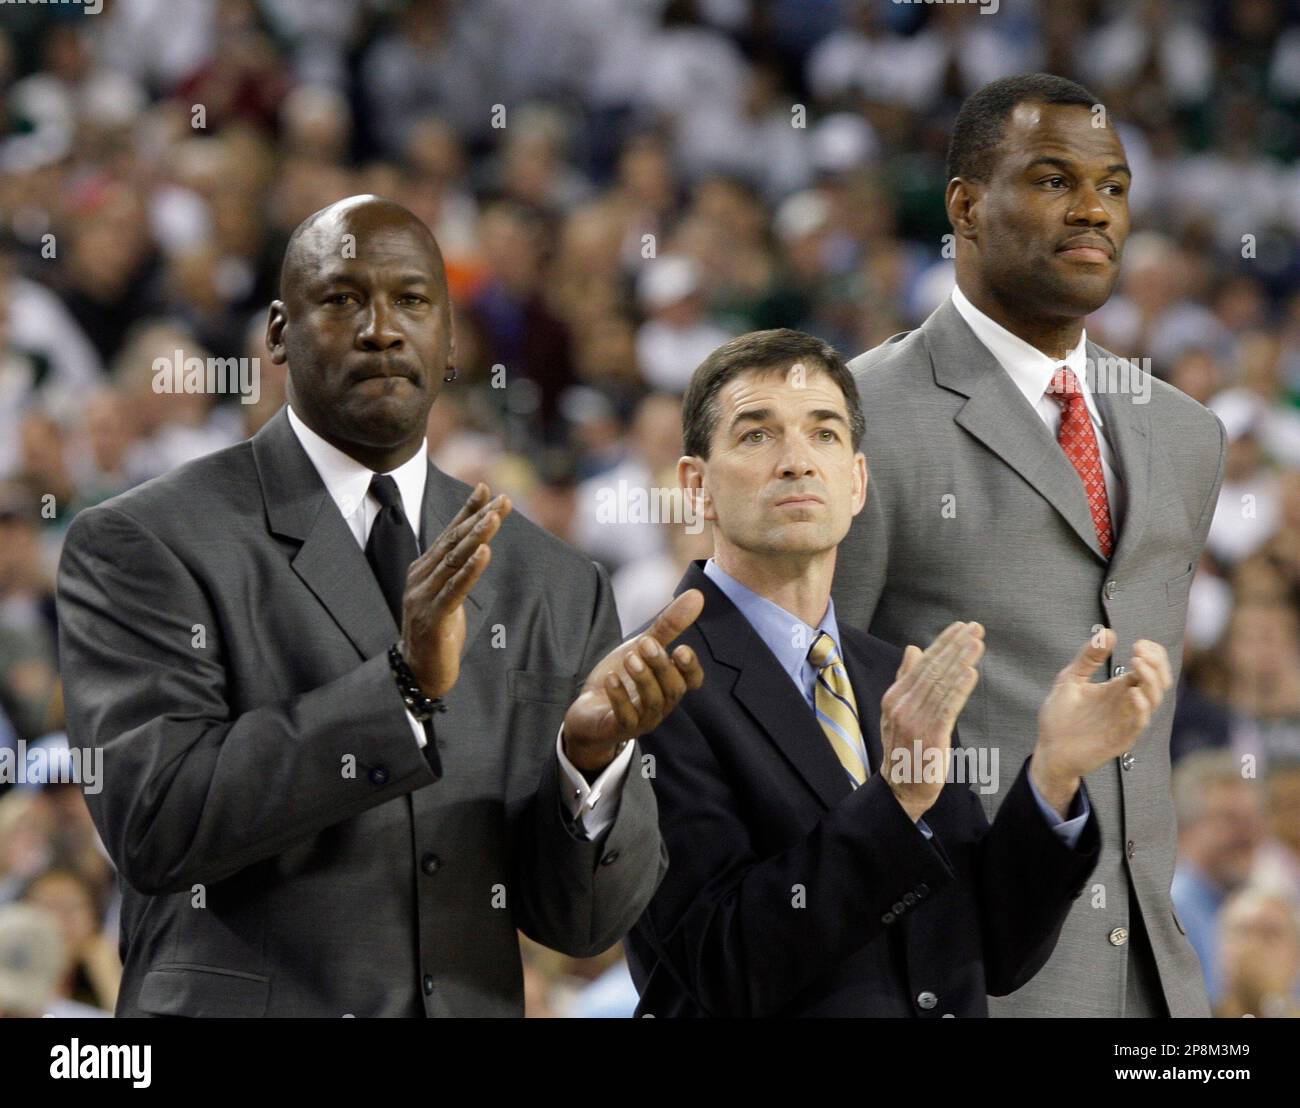 Former NBA basketball players David Robinson, Michael Jordan, John Stockton  and Rutgers women's coach C. Vivian Stringer, left to right, are honored at  halftime of the NCAA Final Four championship basketball game